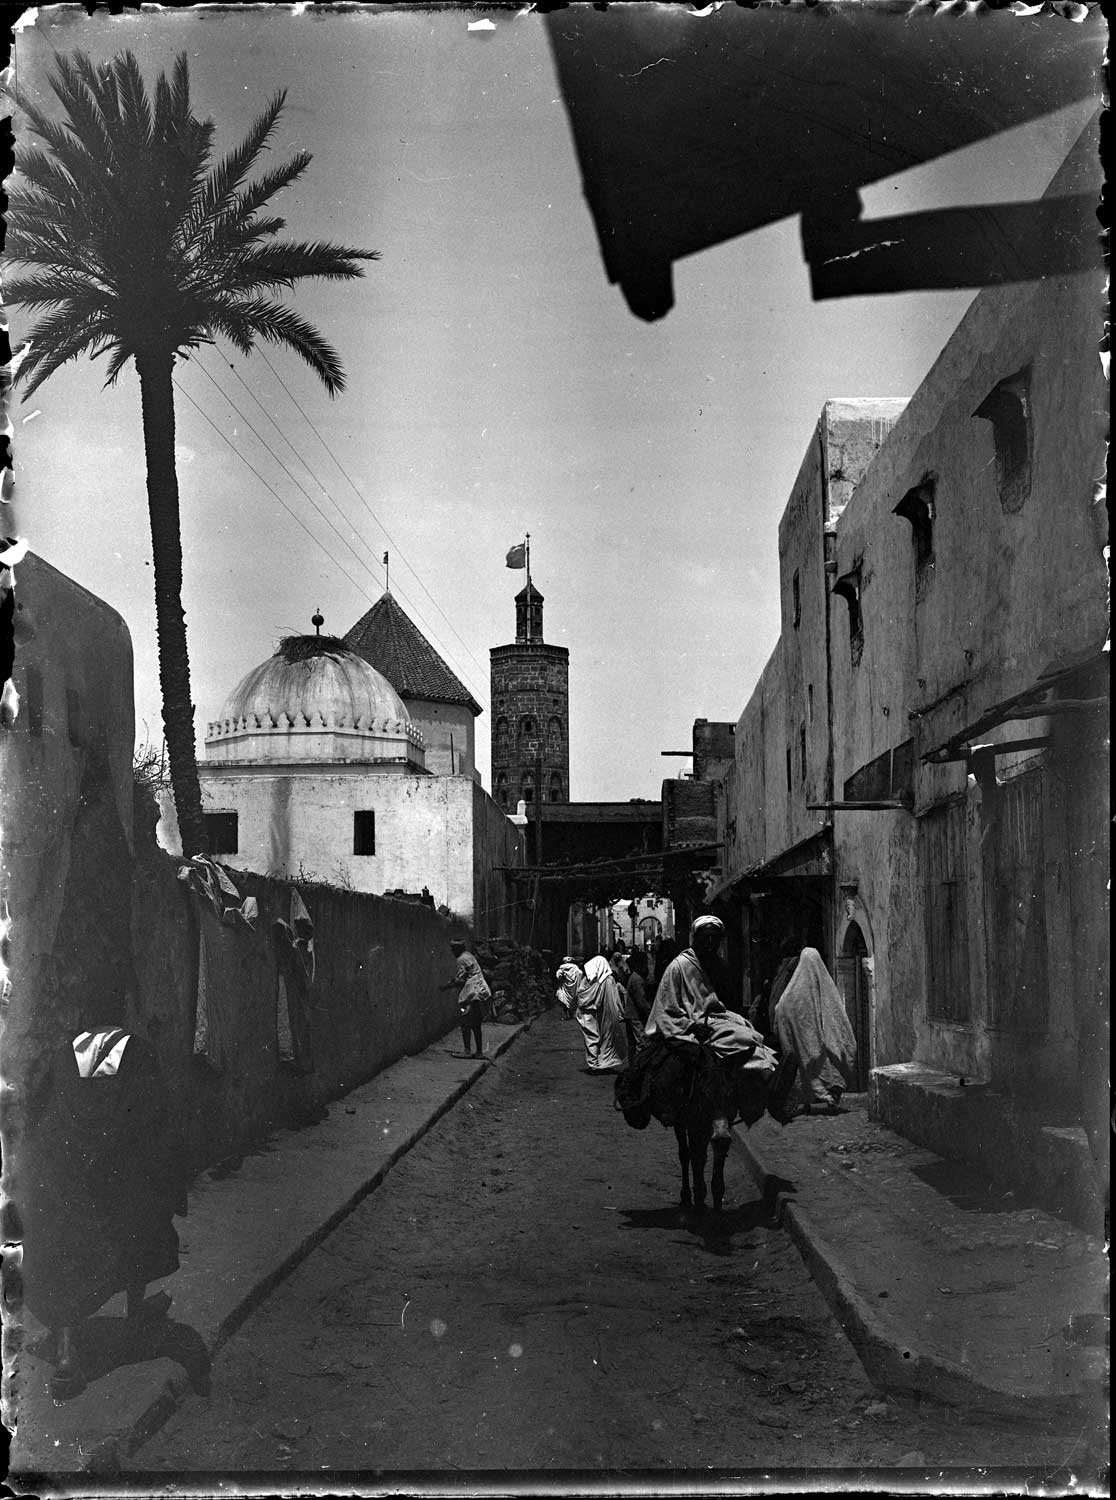 View down a street, a domed marabout, green tiled roof of a zawiyya, and octagonal minaret on the left